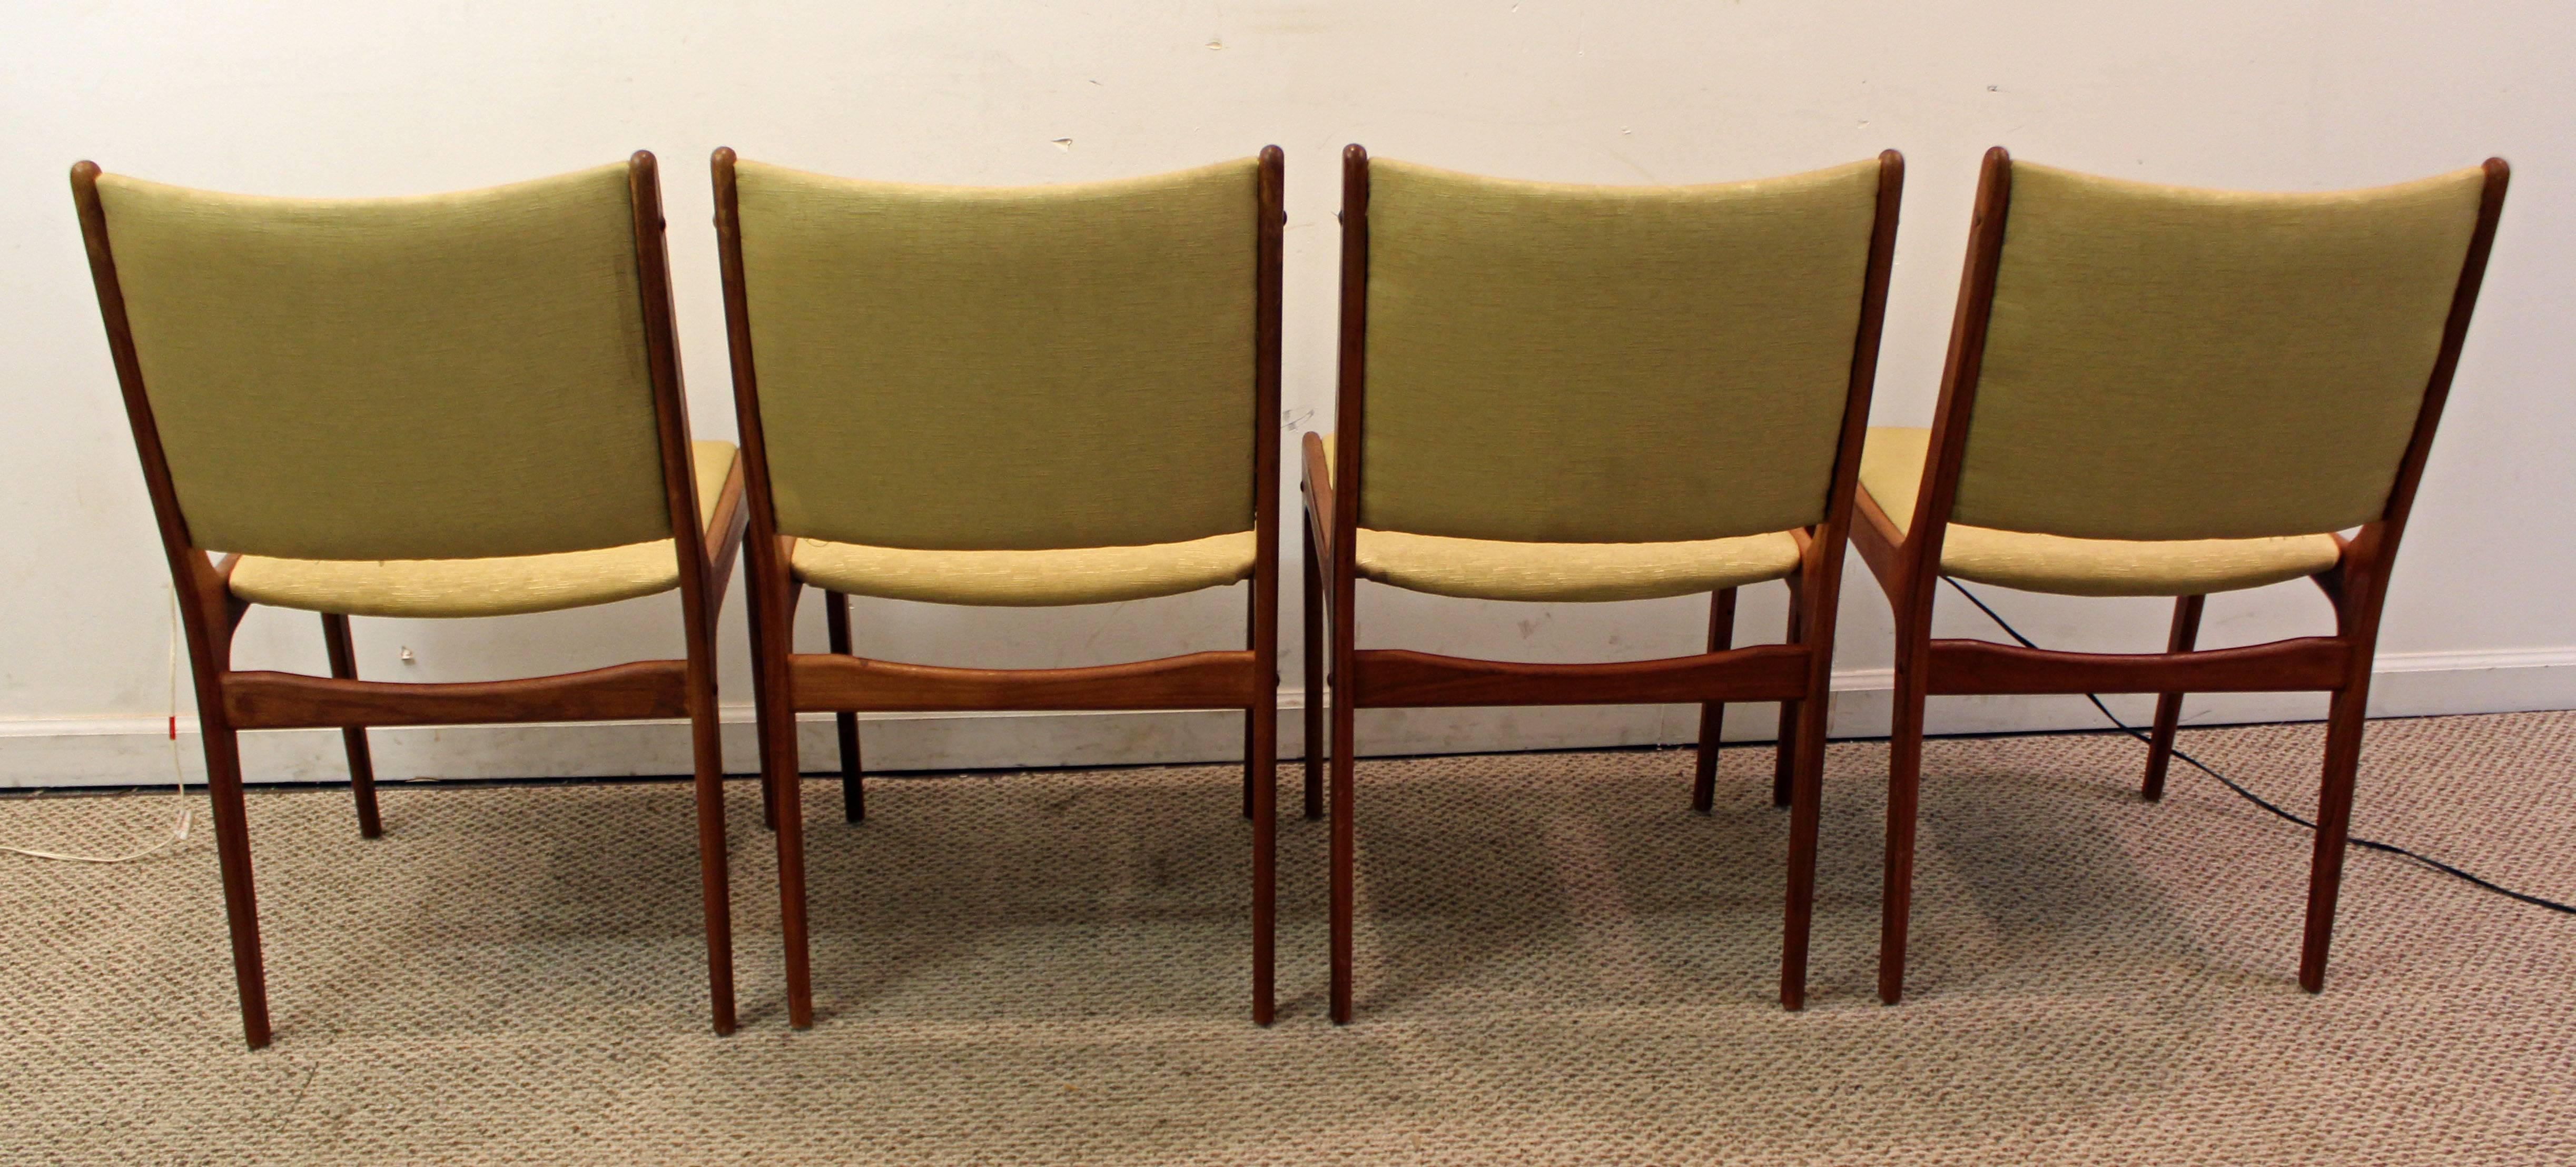 Unknown Set of Four Midcentury Danish Modern Mobler Style Teak Dining Chairs